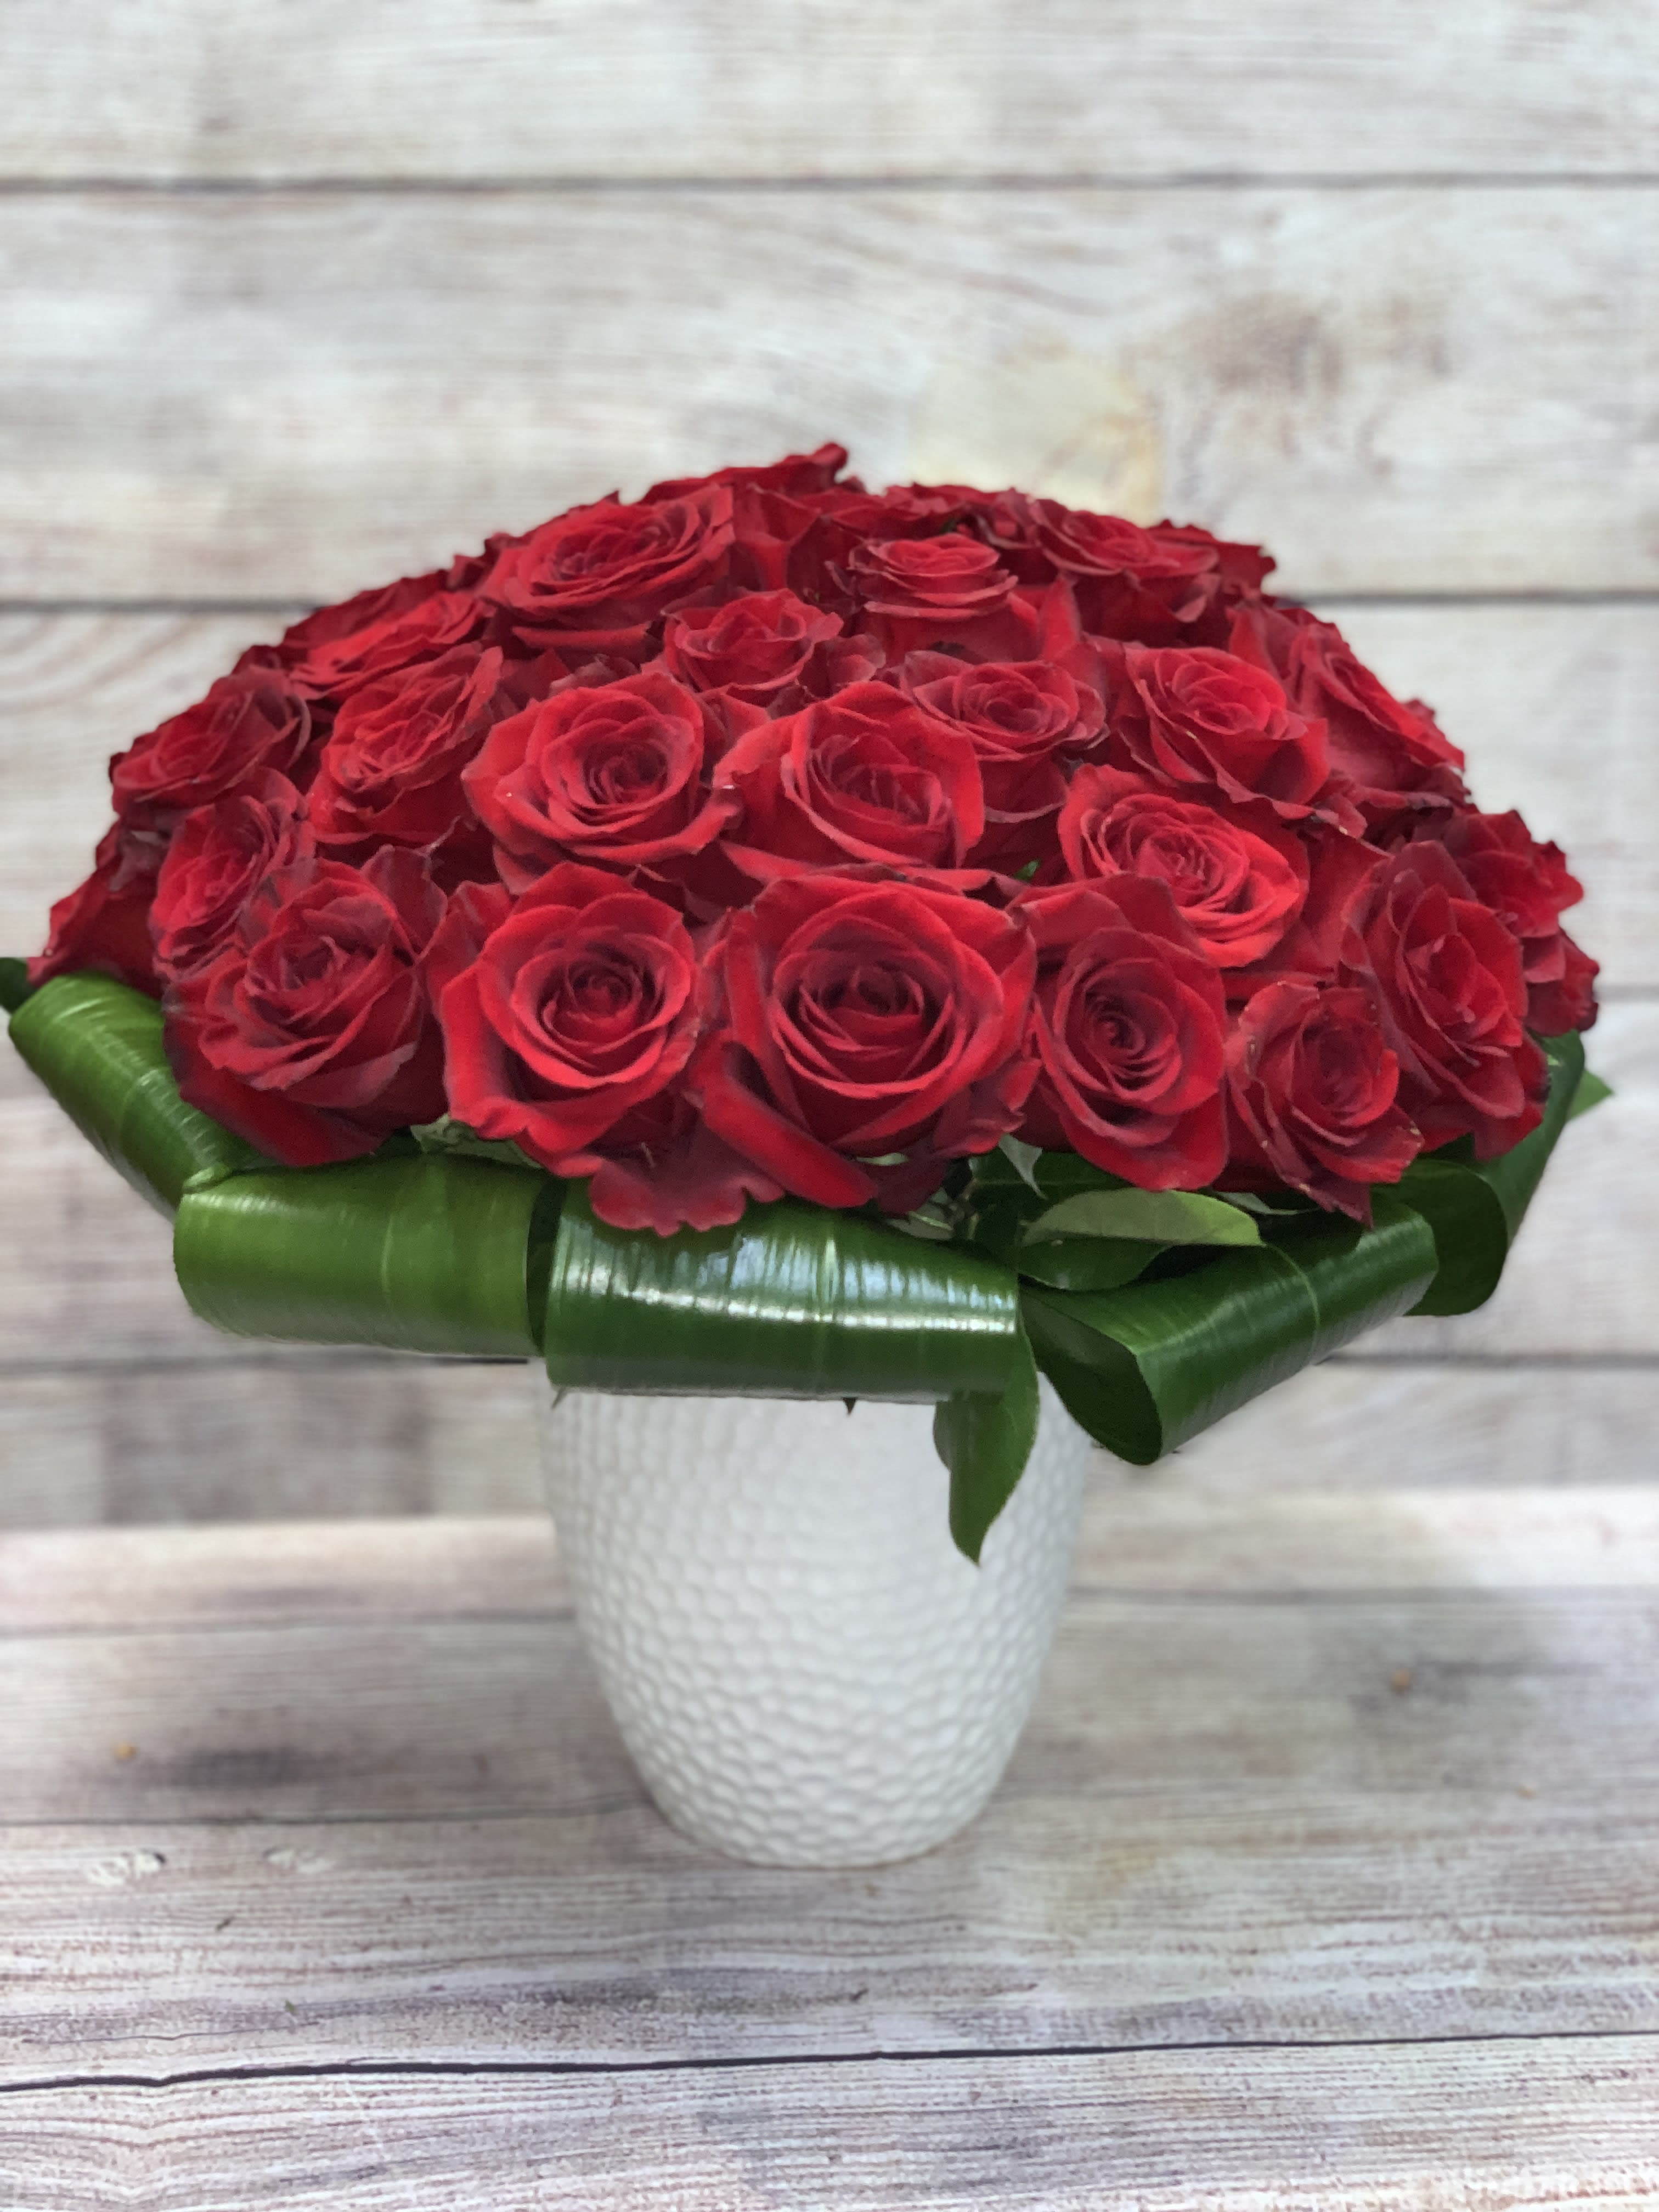 Sweet Fifty - Make your Valentine feel like royalty with this plush and lush arrangement with Fifty of our finest Roses. Available in Red, White, Pink, Purple, Yellow, and Apricot. 